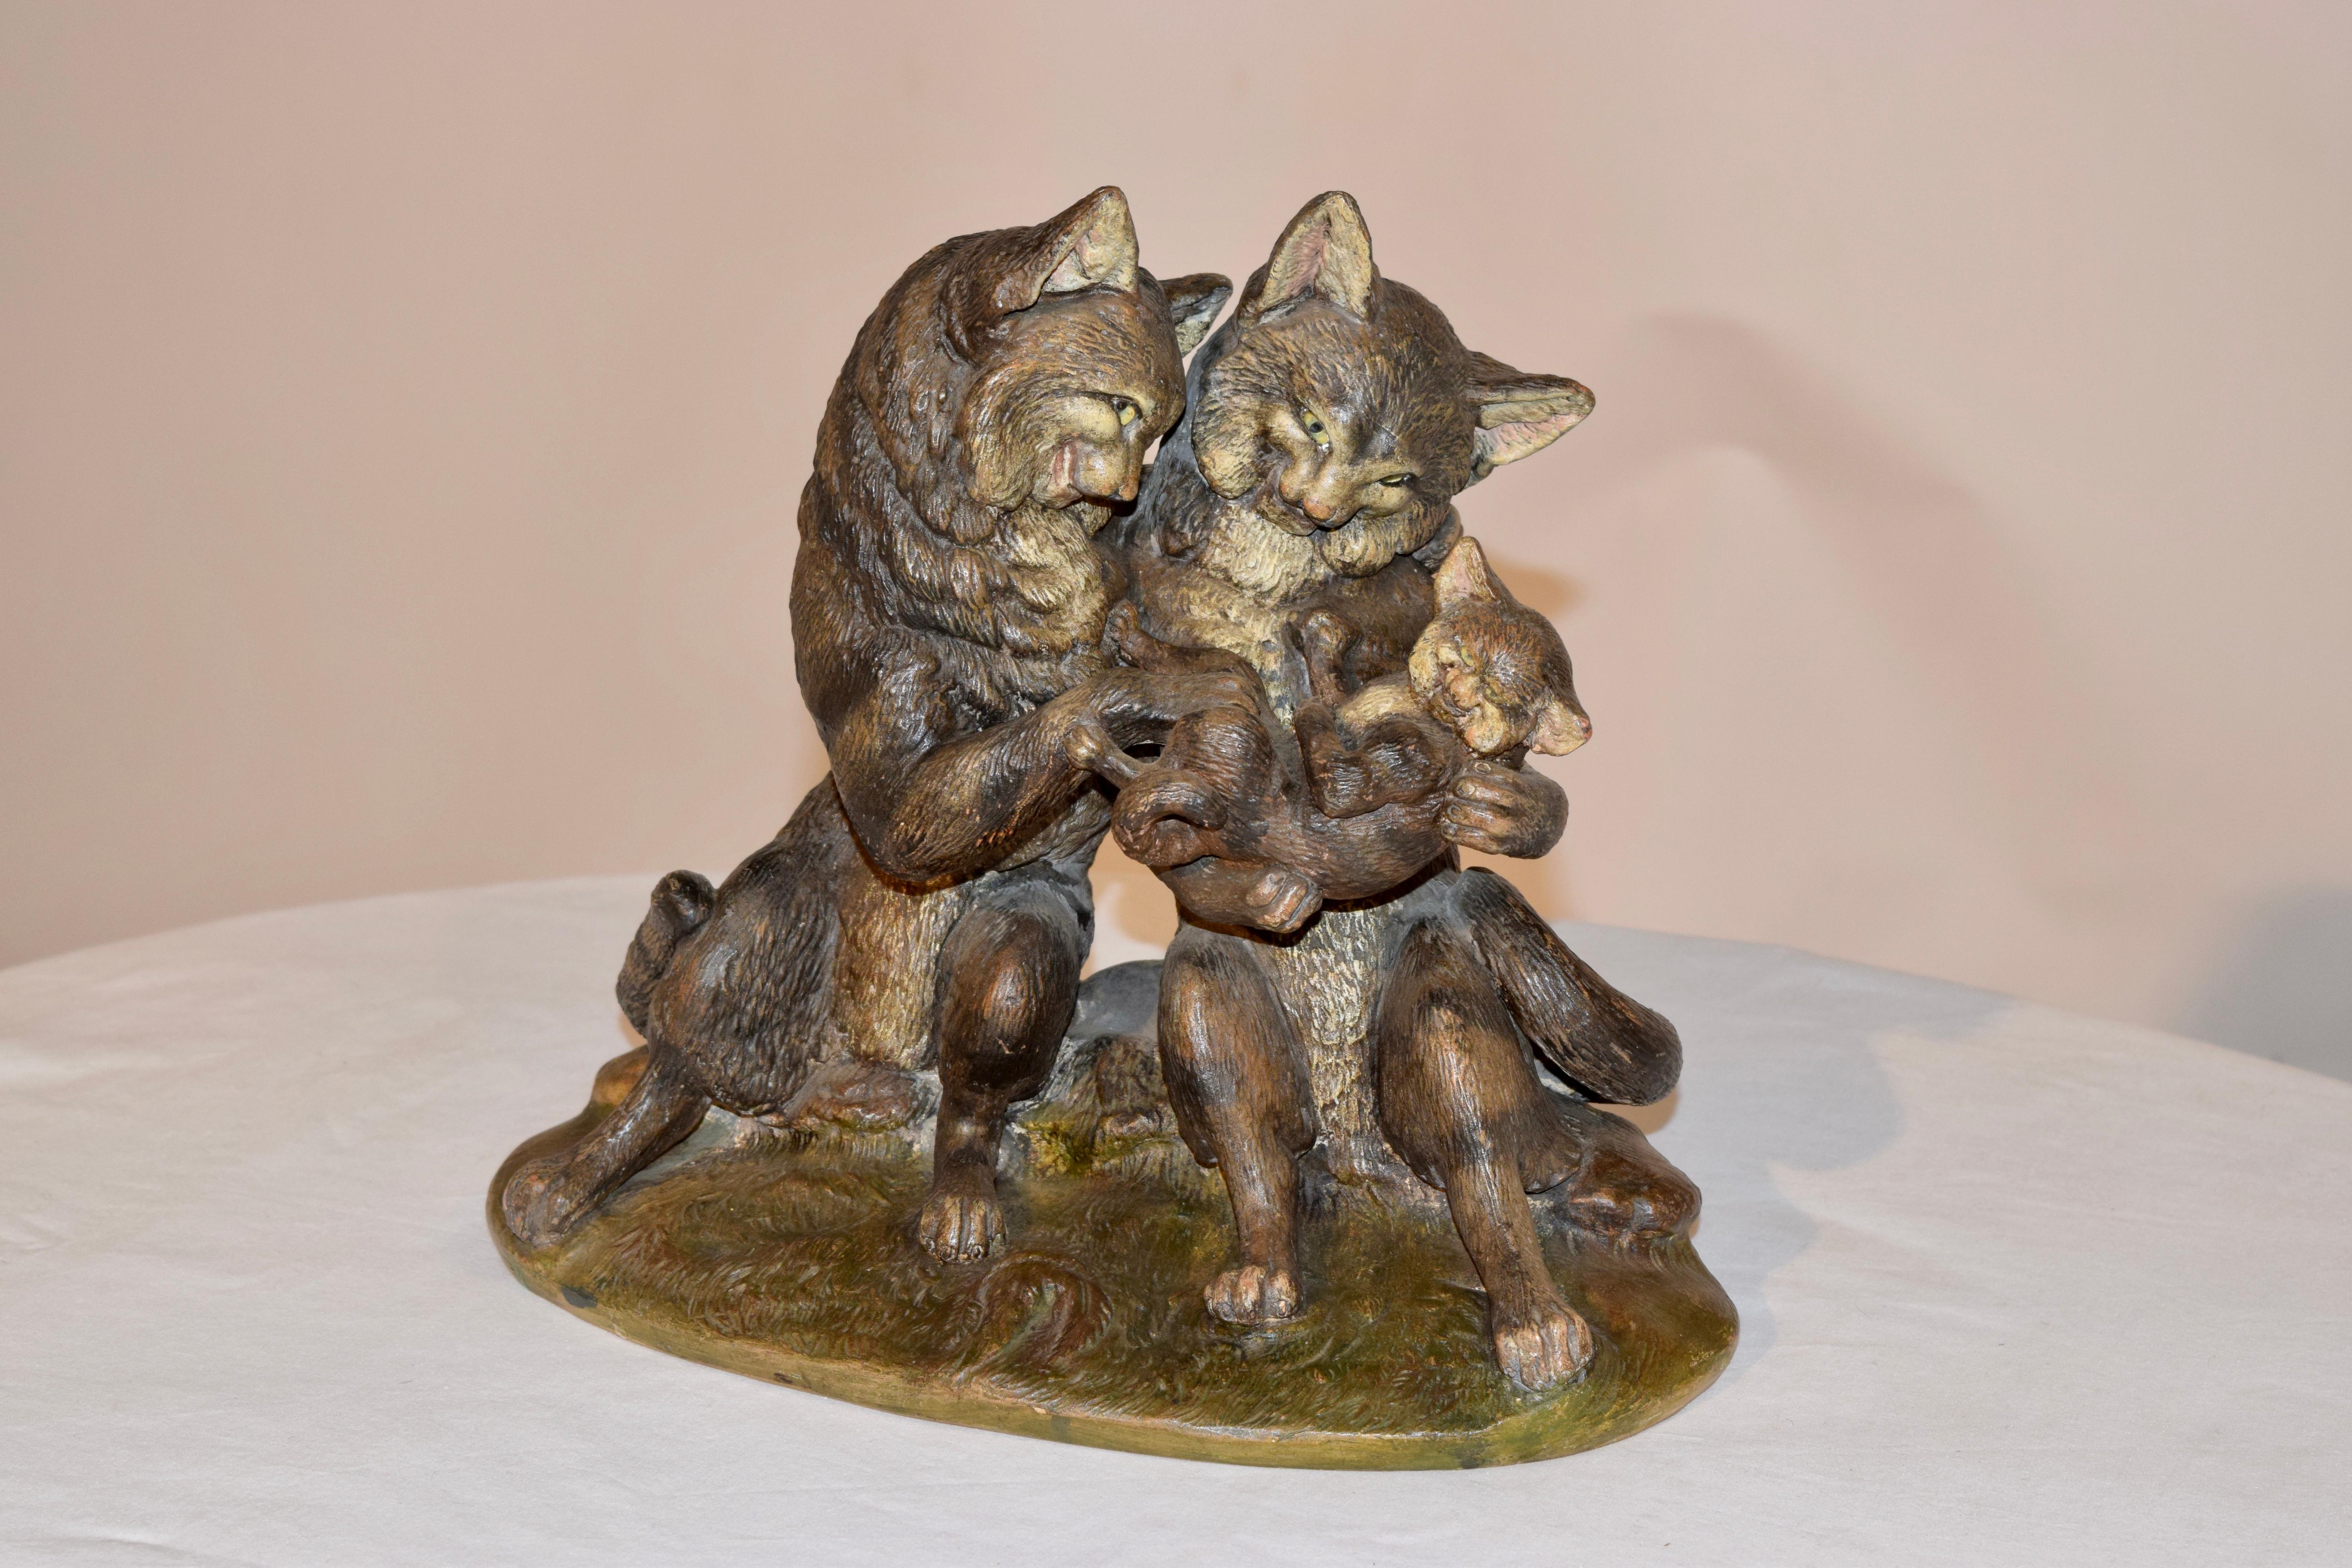 19th century Austrian figural group of a family of cats. The group has been cold painted and has vibrant coloring. The male and female cats have striped coats and glass eyes, and are depicted holding a baby cat, as they look on adoringly. They